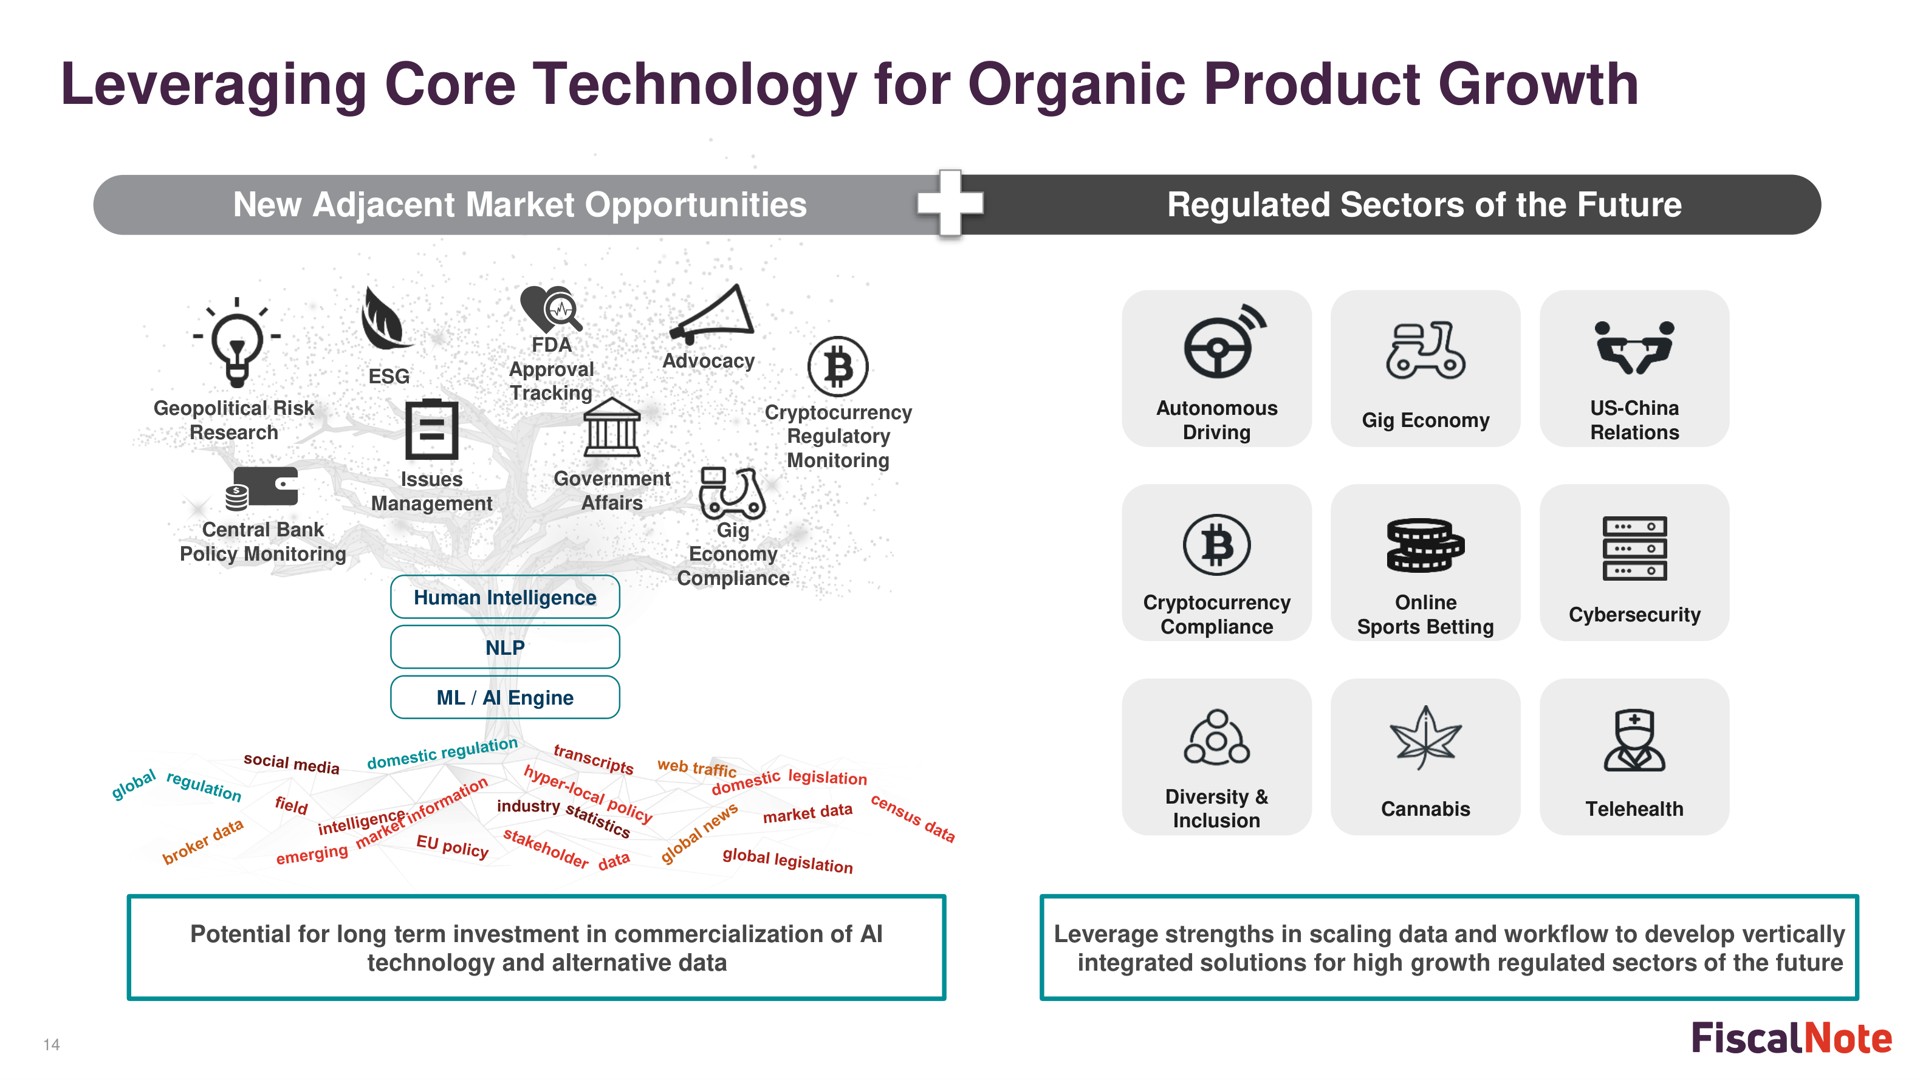 leveraging core technology for organic product growth | FiscalNote